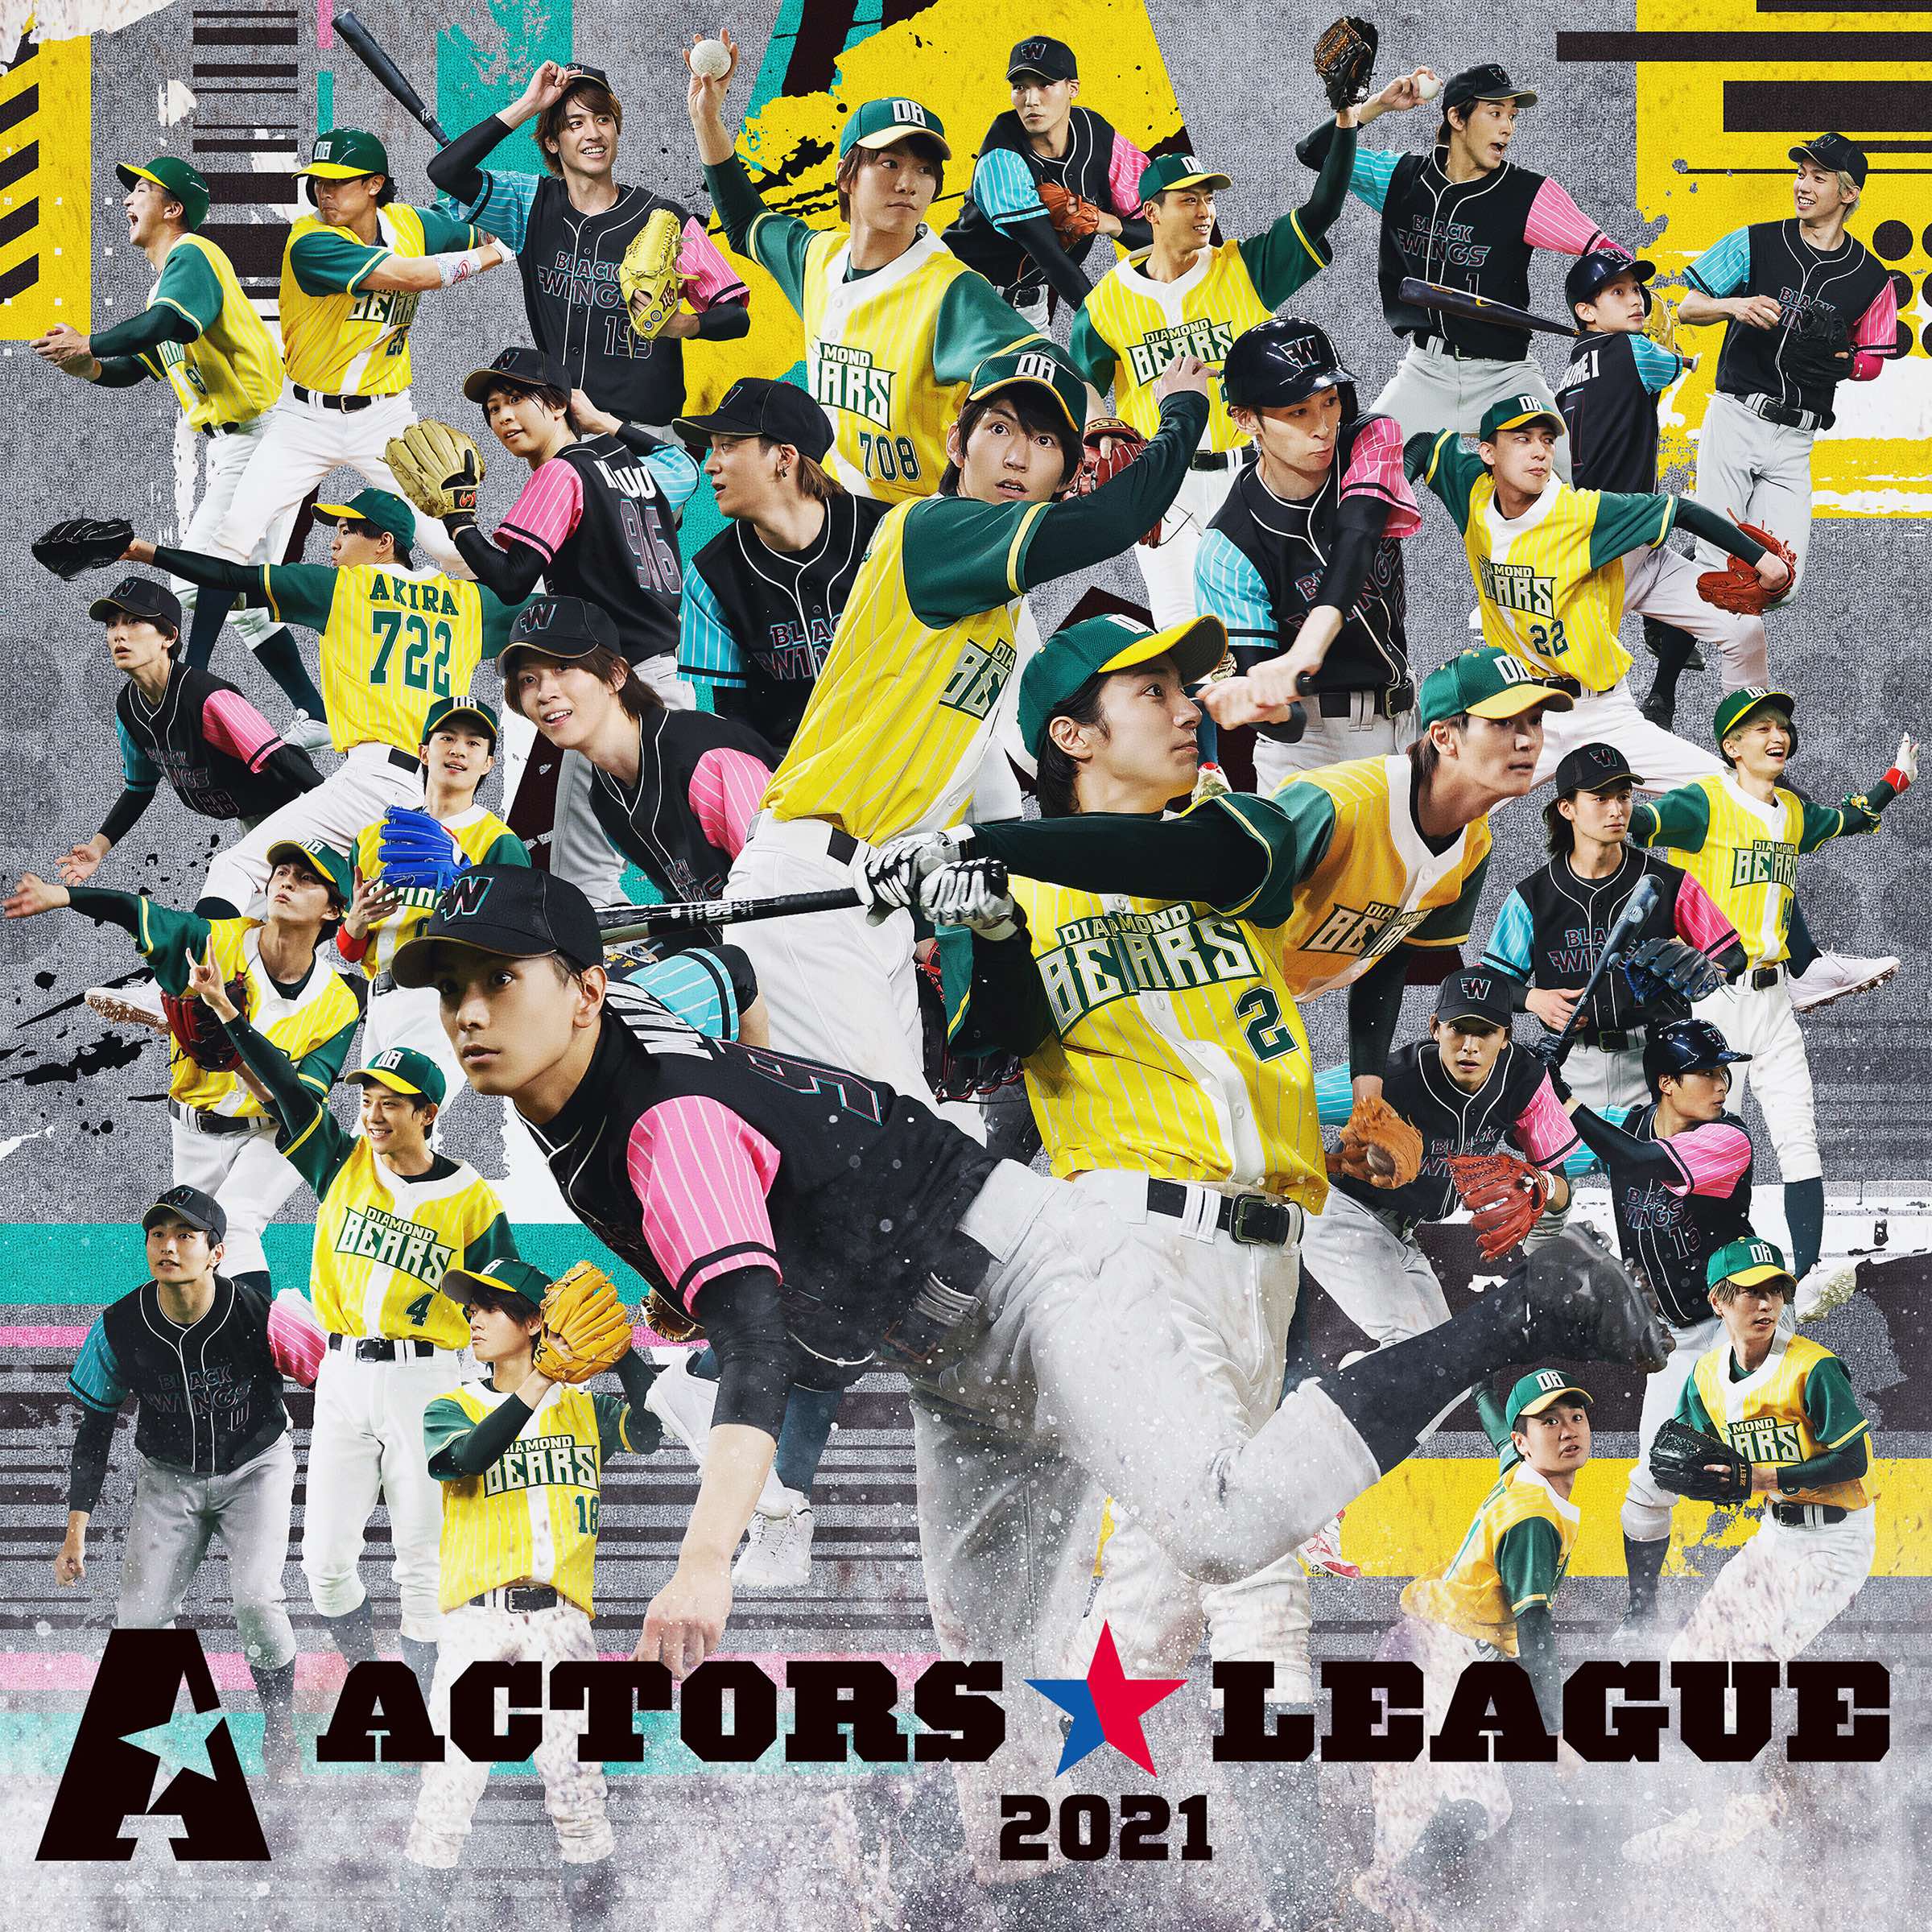 ACTORS☆LEAGUE 2021 (CD+Blu-ray) release on December 15th,2021 No.1